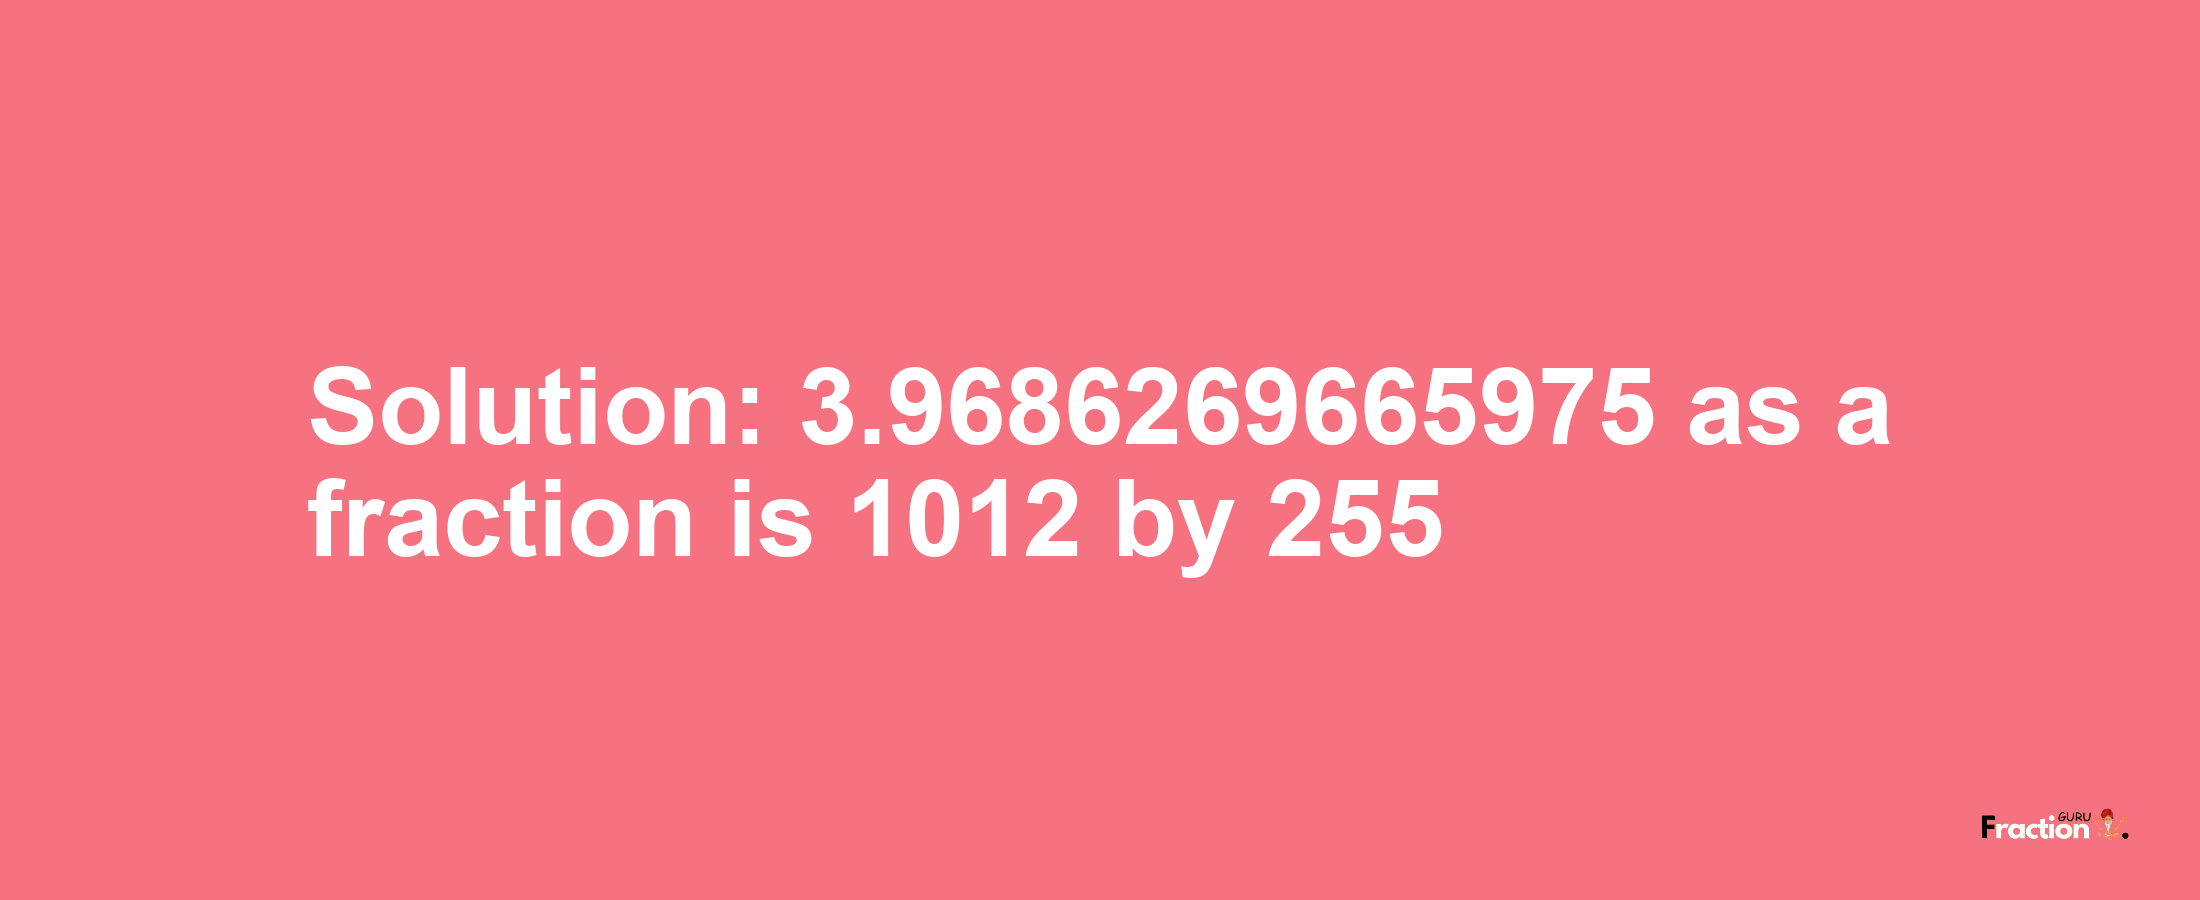 Solution:3.9686269665975 as a fraction is 1012/255